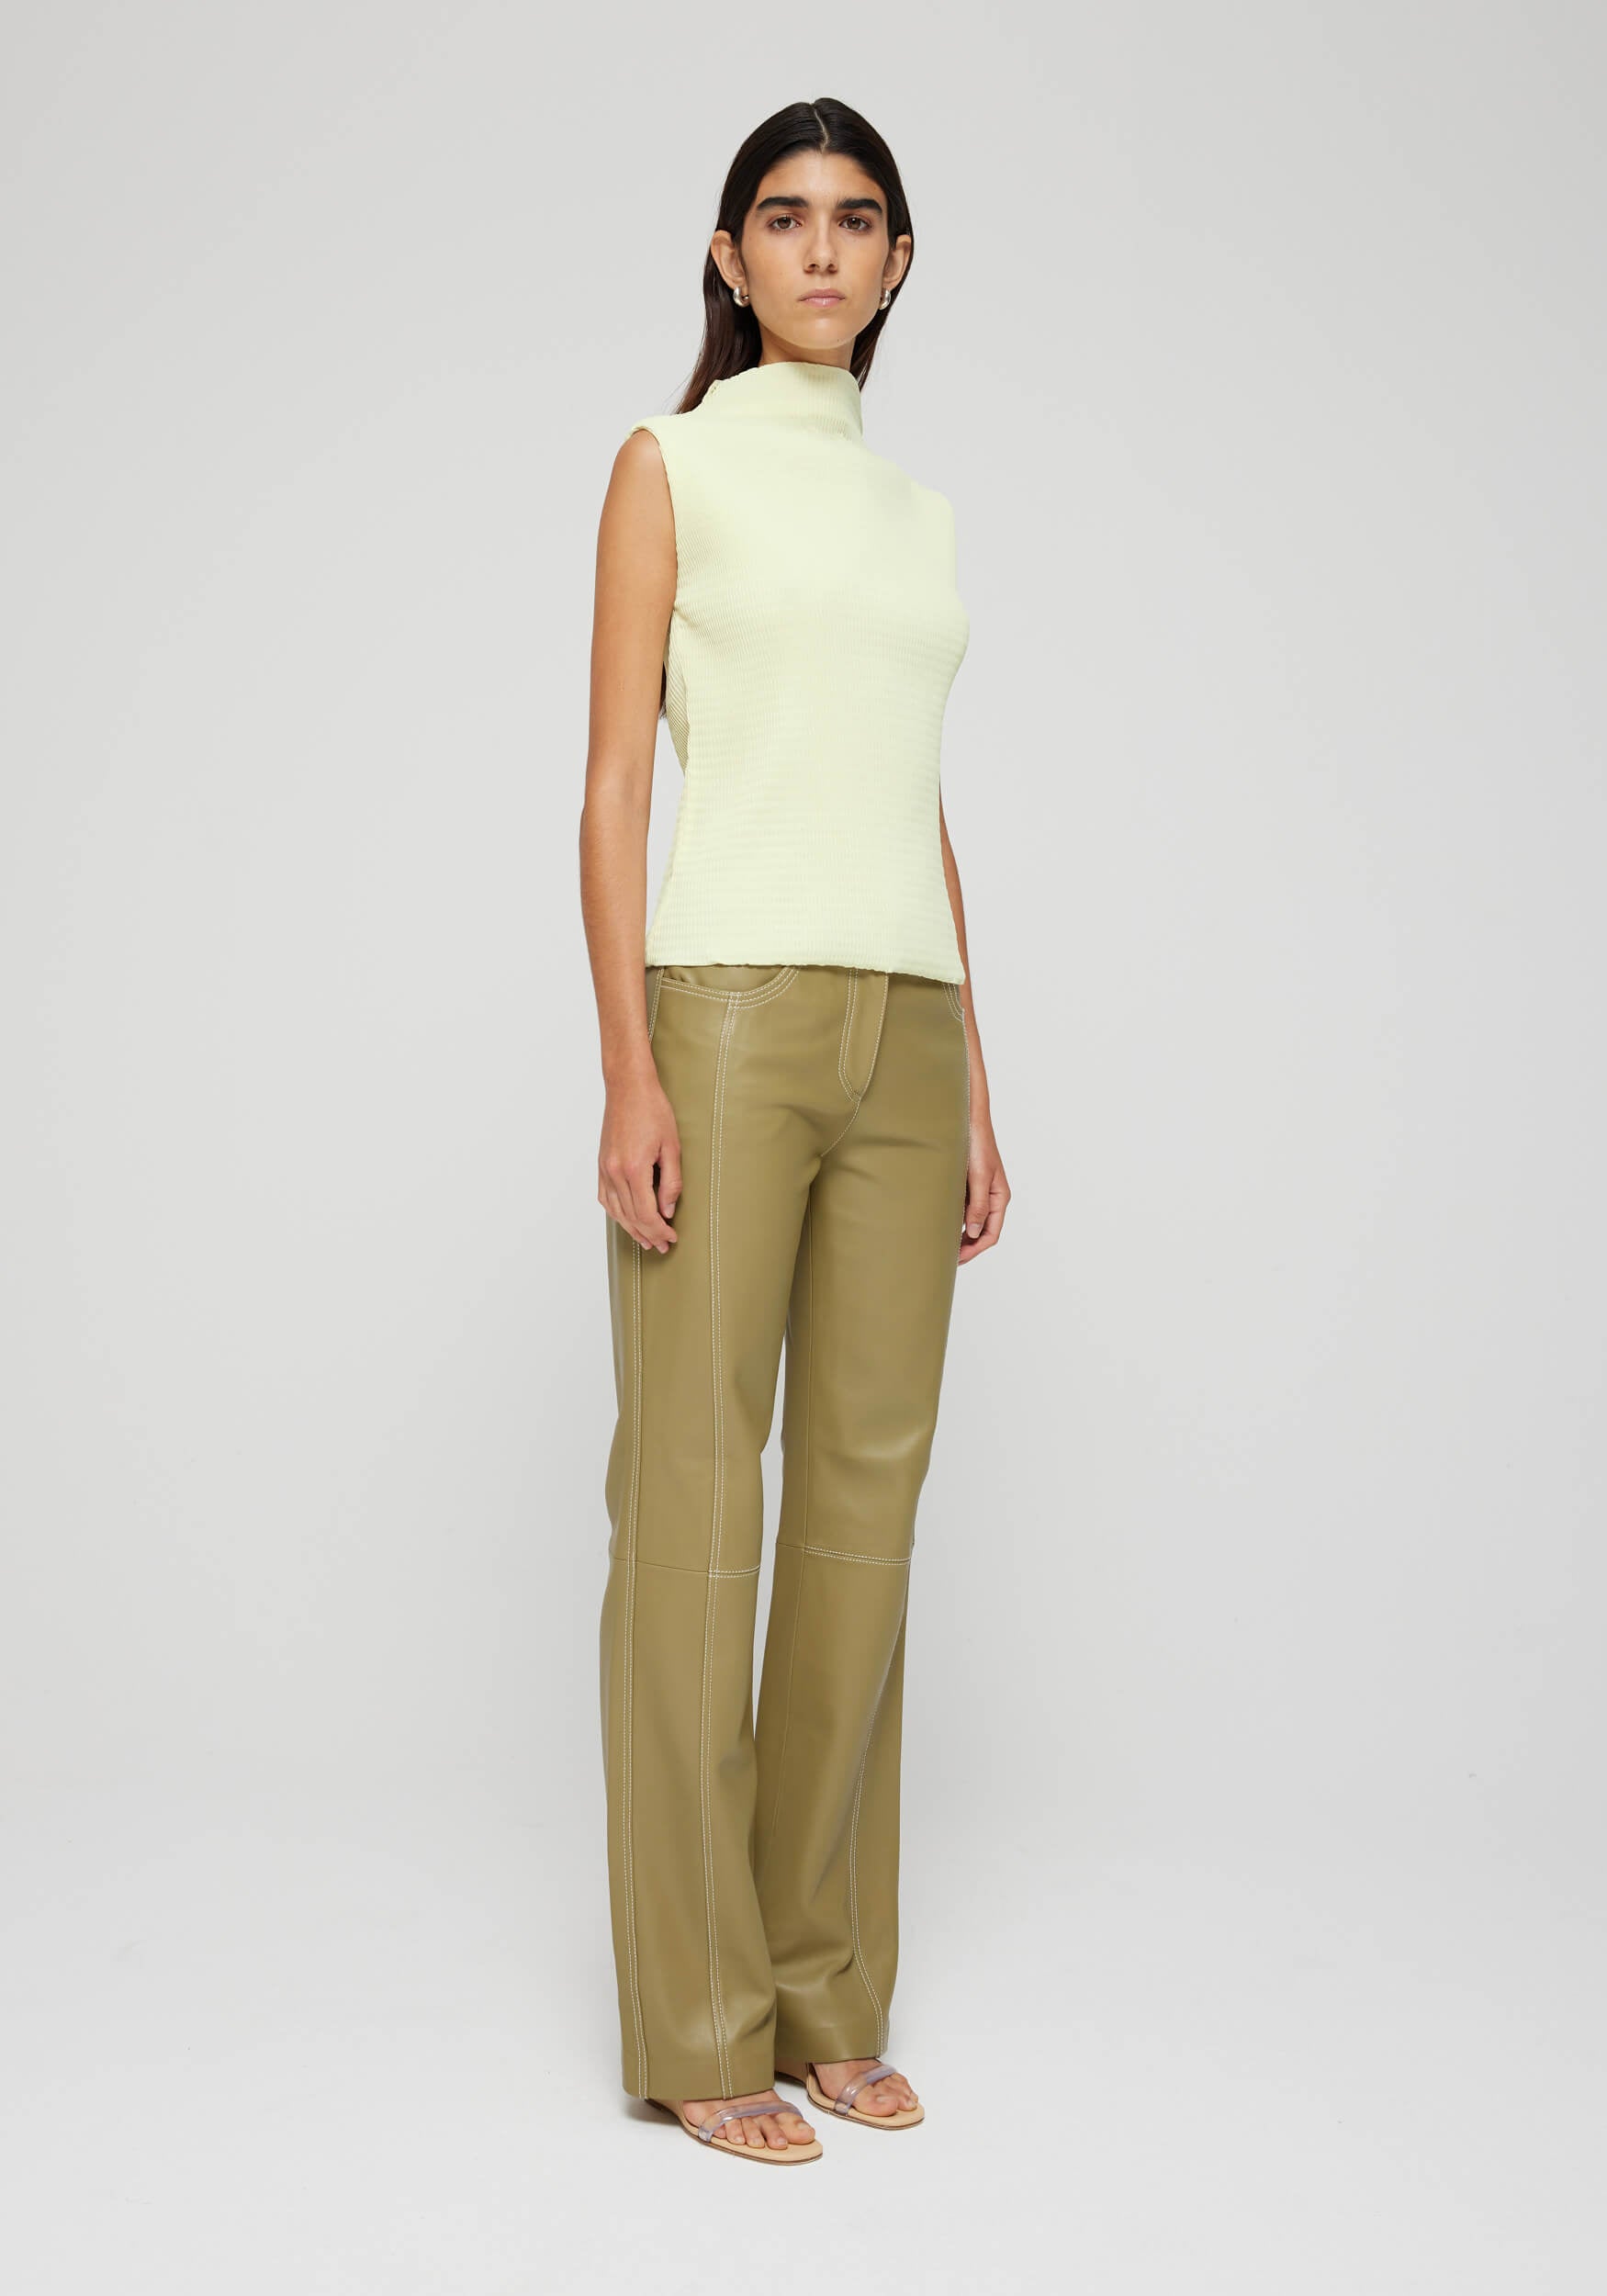 Rohe Sleeveless Textured Top in Light Yellow available at TNT The New Trend Australia. Free shipping on orders over $300 AUD.